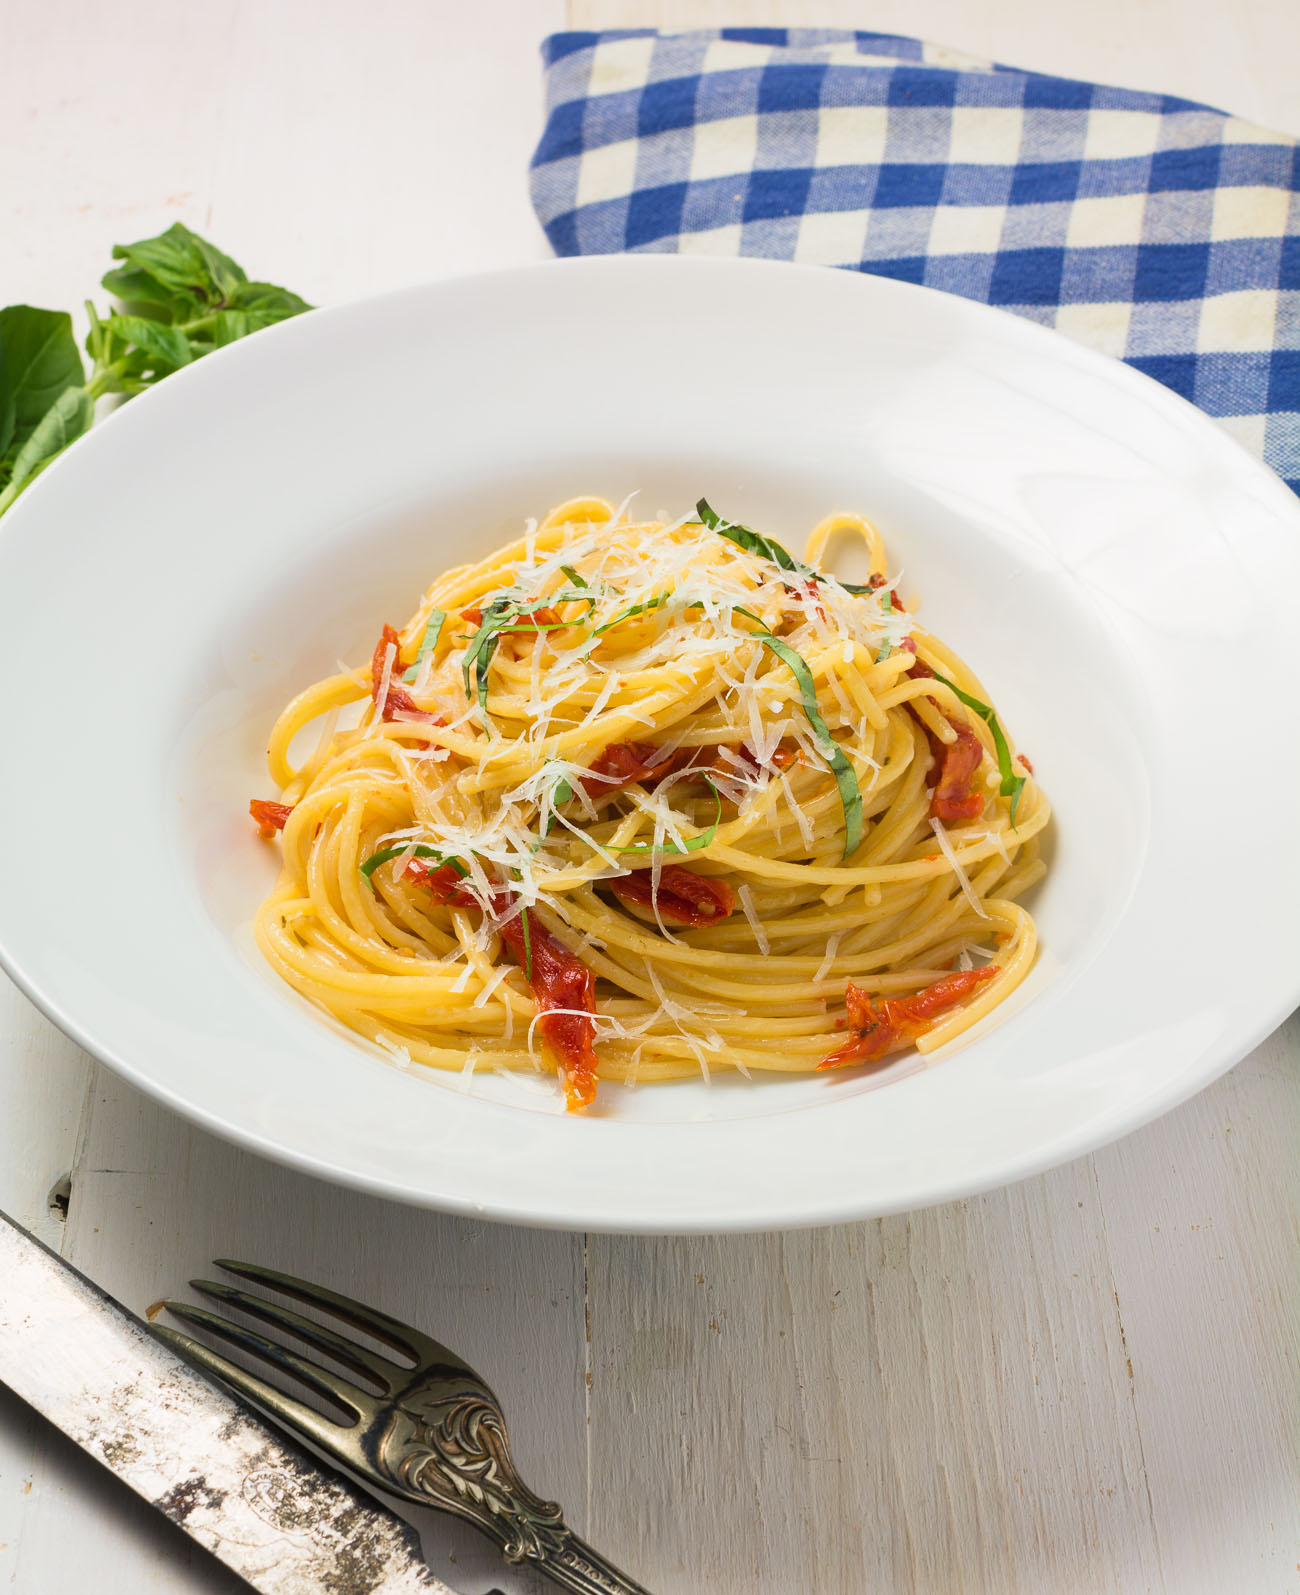 Spaghetti with sun-dried tomatoes and pecorino romano is a delicious weeknight meal.